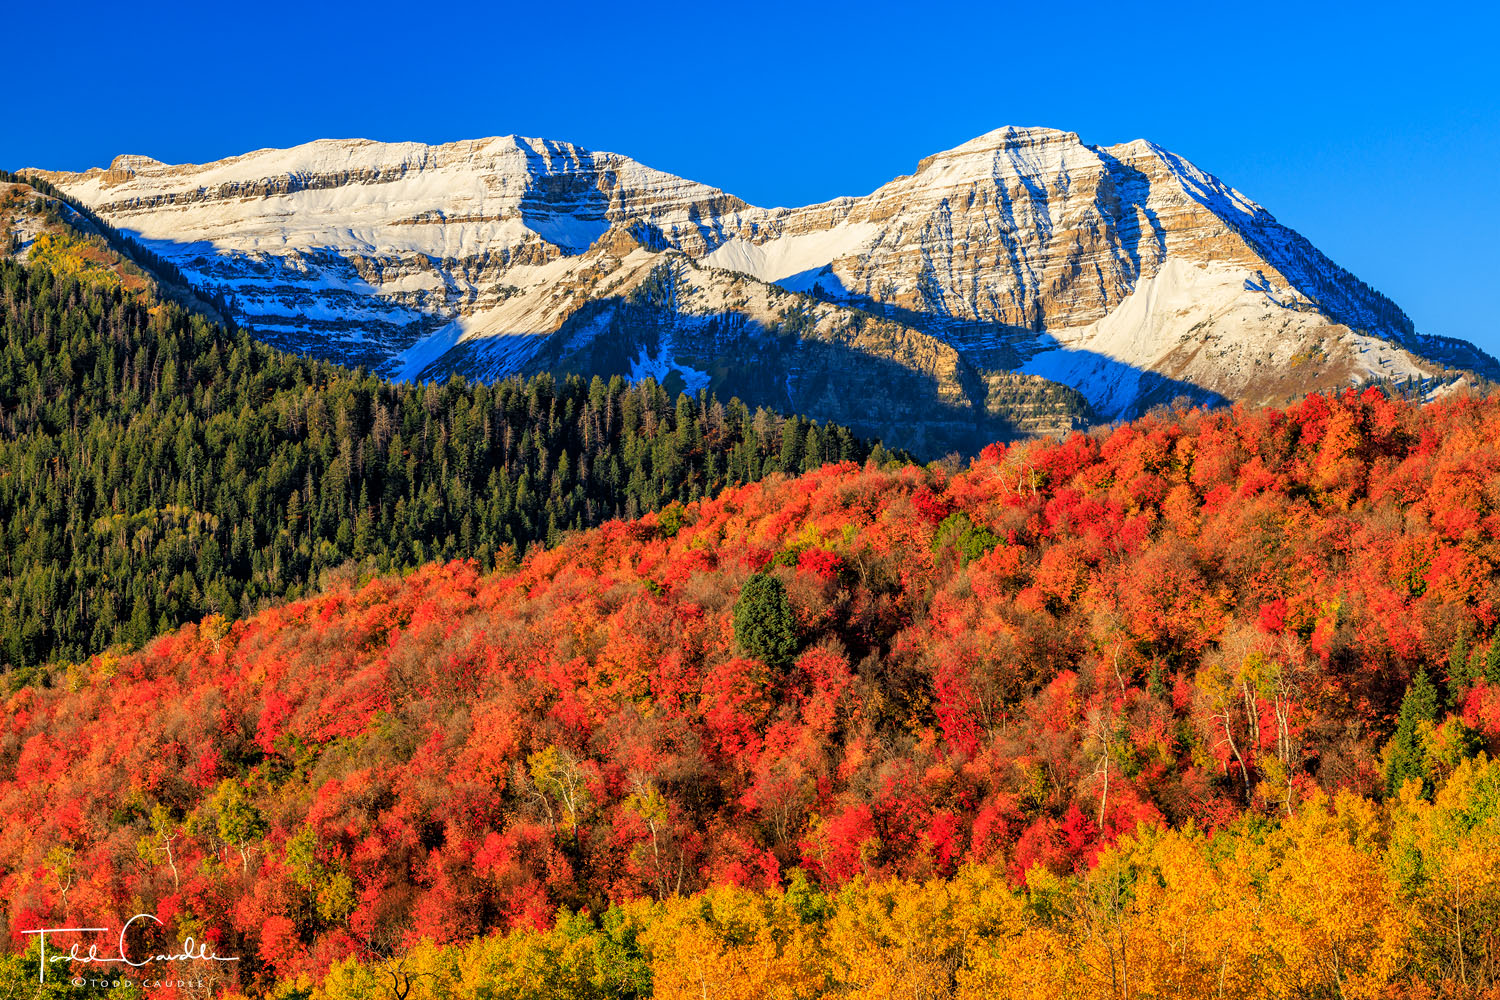 Bomber Peak and North Timpanogos rise above stunning red maples and gold aspens as fall colors hit their stride in the Wasatch...